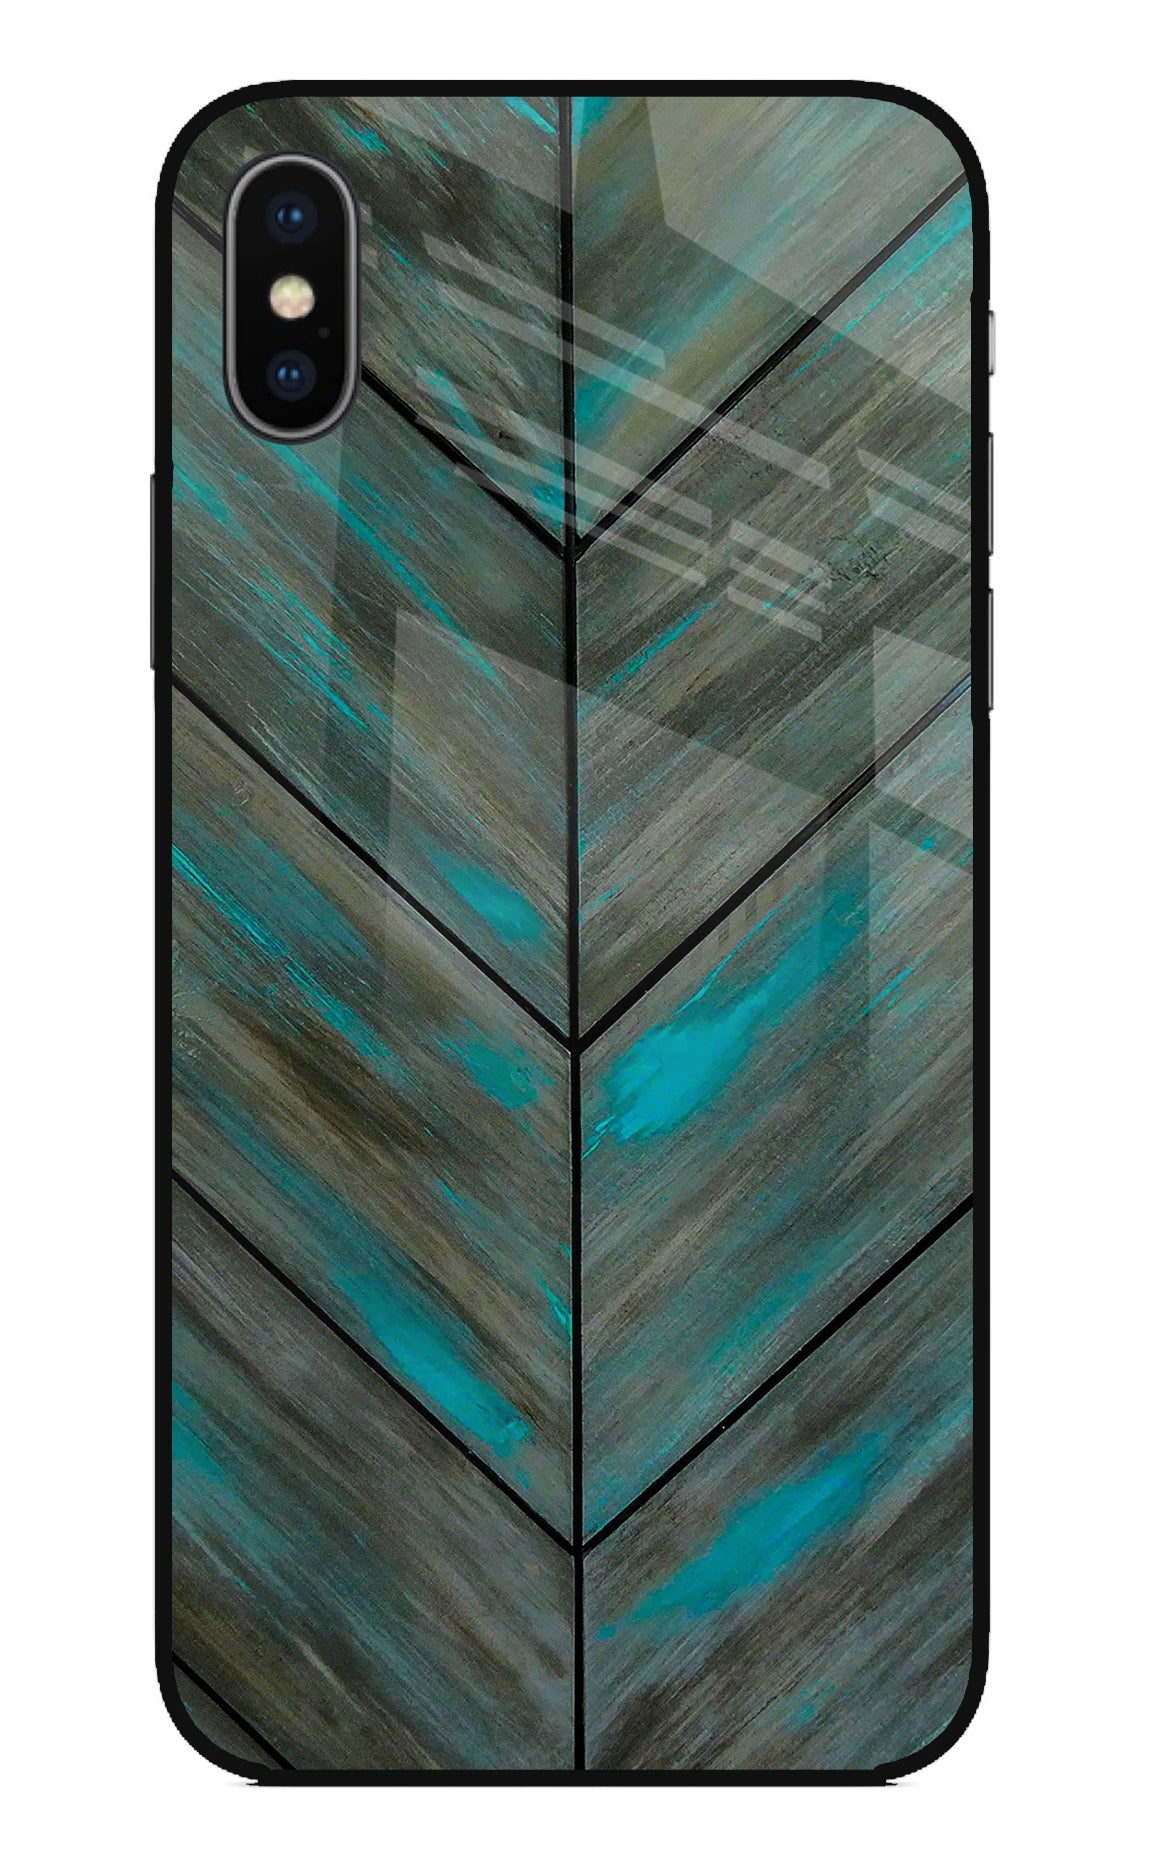 Pattern iPhone X Back Cover